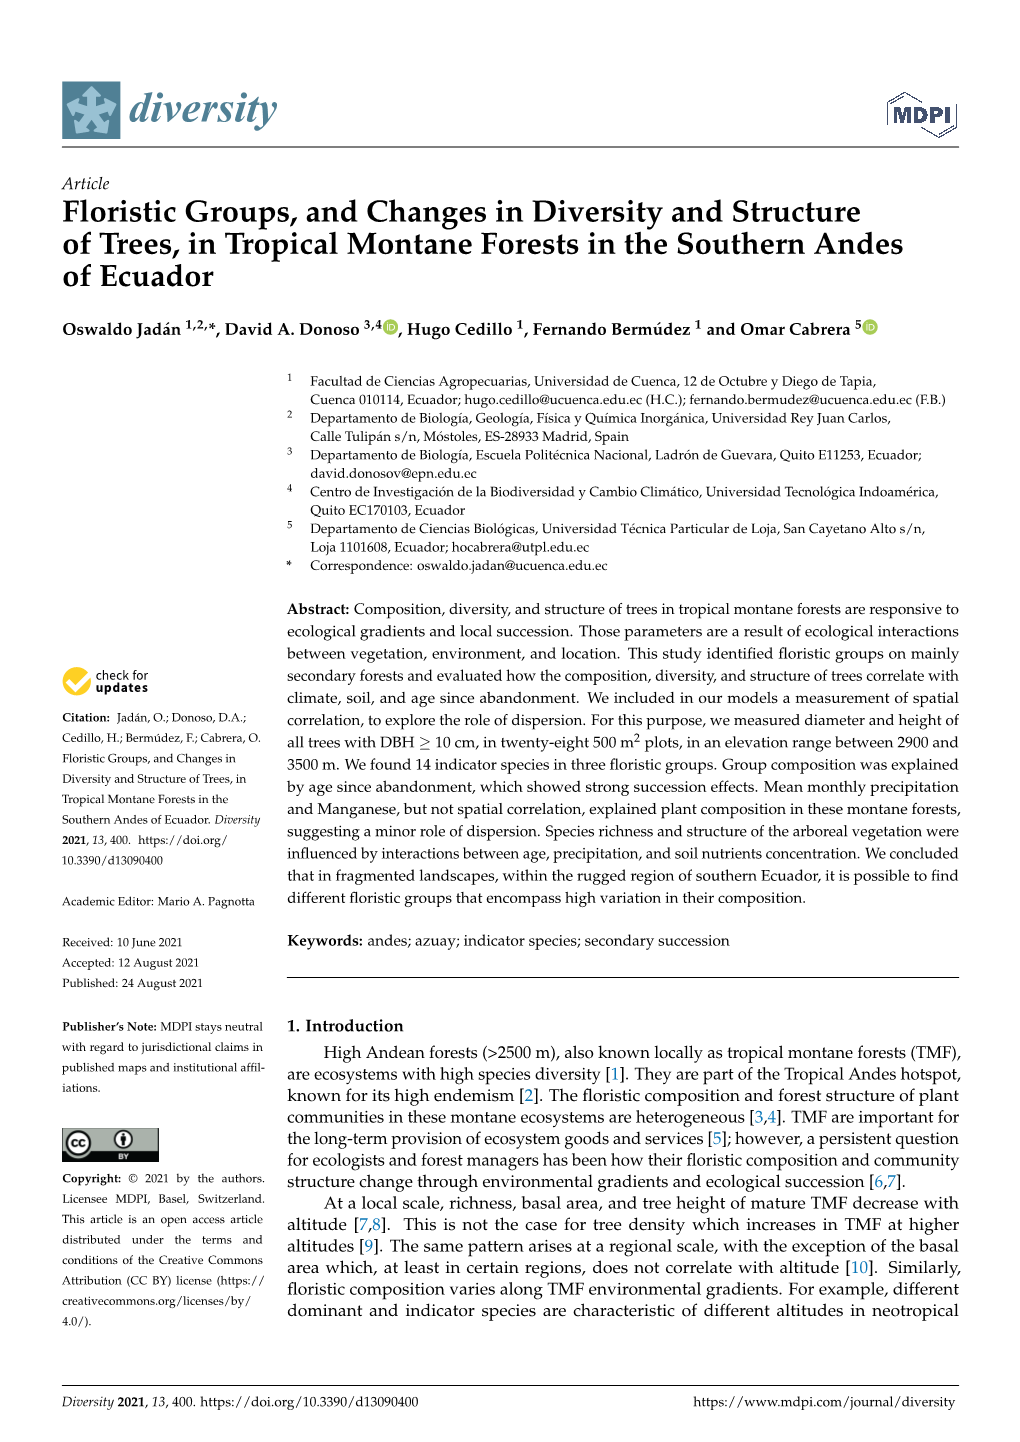 Floristic Groups, and Changes in Diversity and Structure of Trees, in Tropical Montane Forests in the Southern Andes of Ecuador